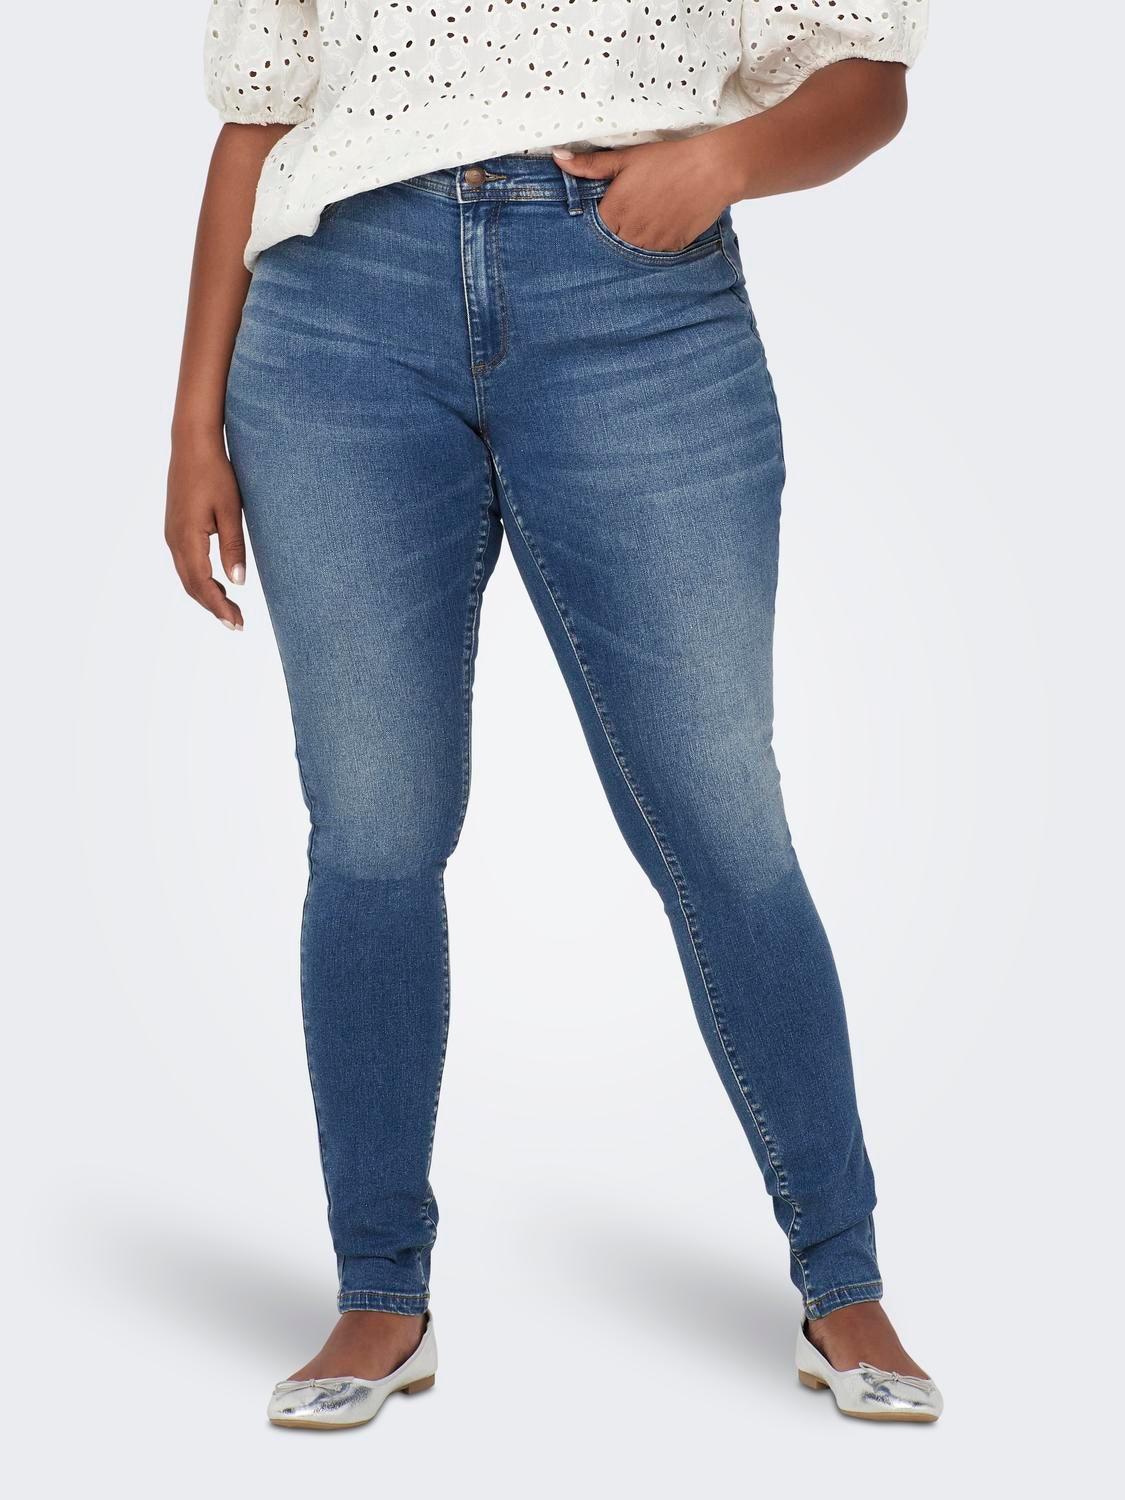 Jeans Life | Mittelblau CarSally | Skinny Curvy Fit ONLY® Reg